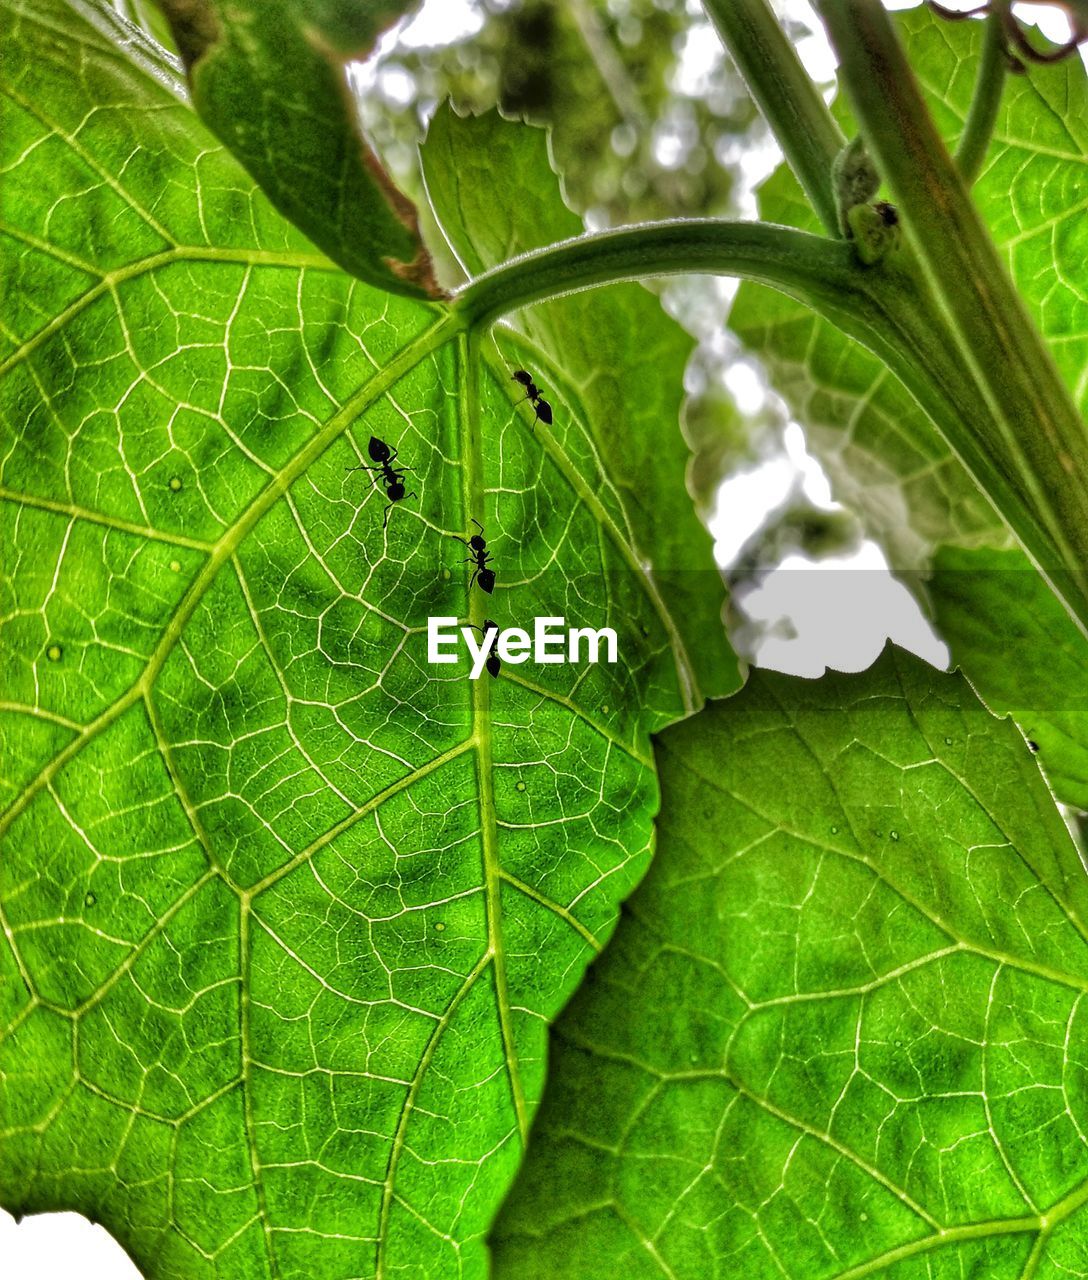 CLOSE-UP OF INSECT ON LEAF